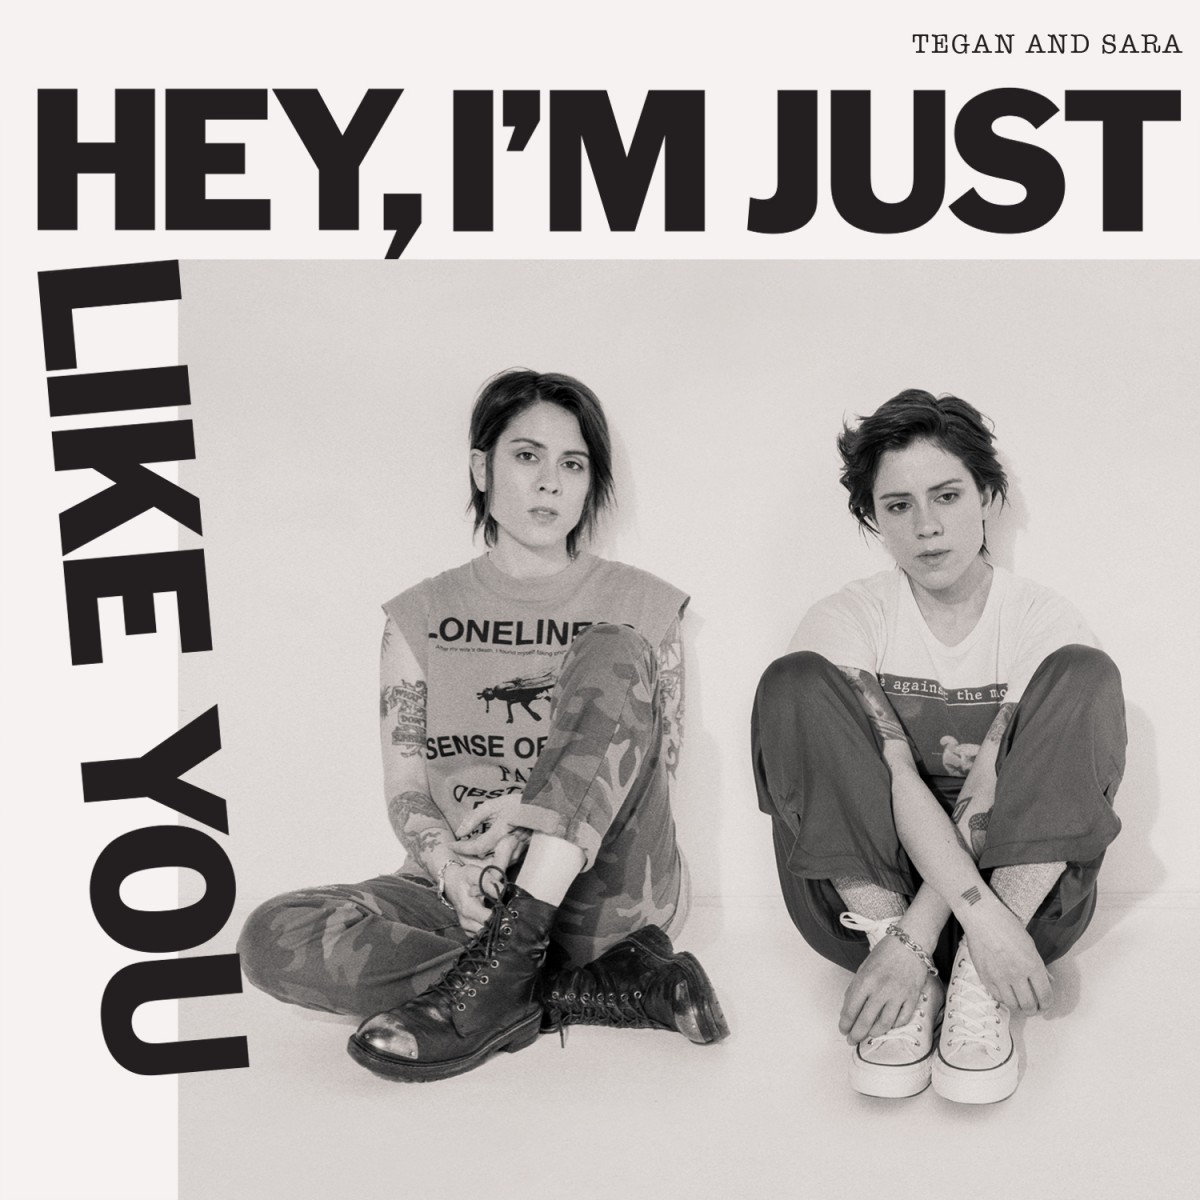 Hey, I’m Just Like You, Tegan And Sara’s Ninth Studio Album, Set For September 27 Release On Sire